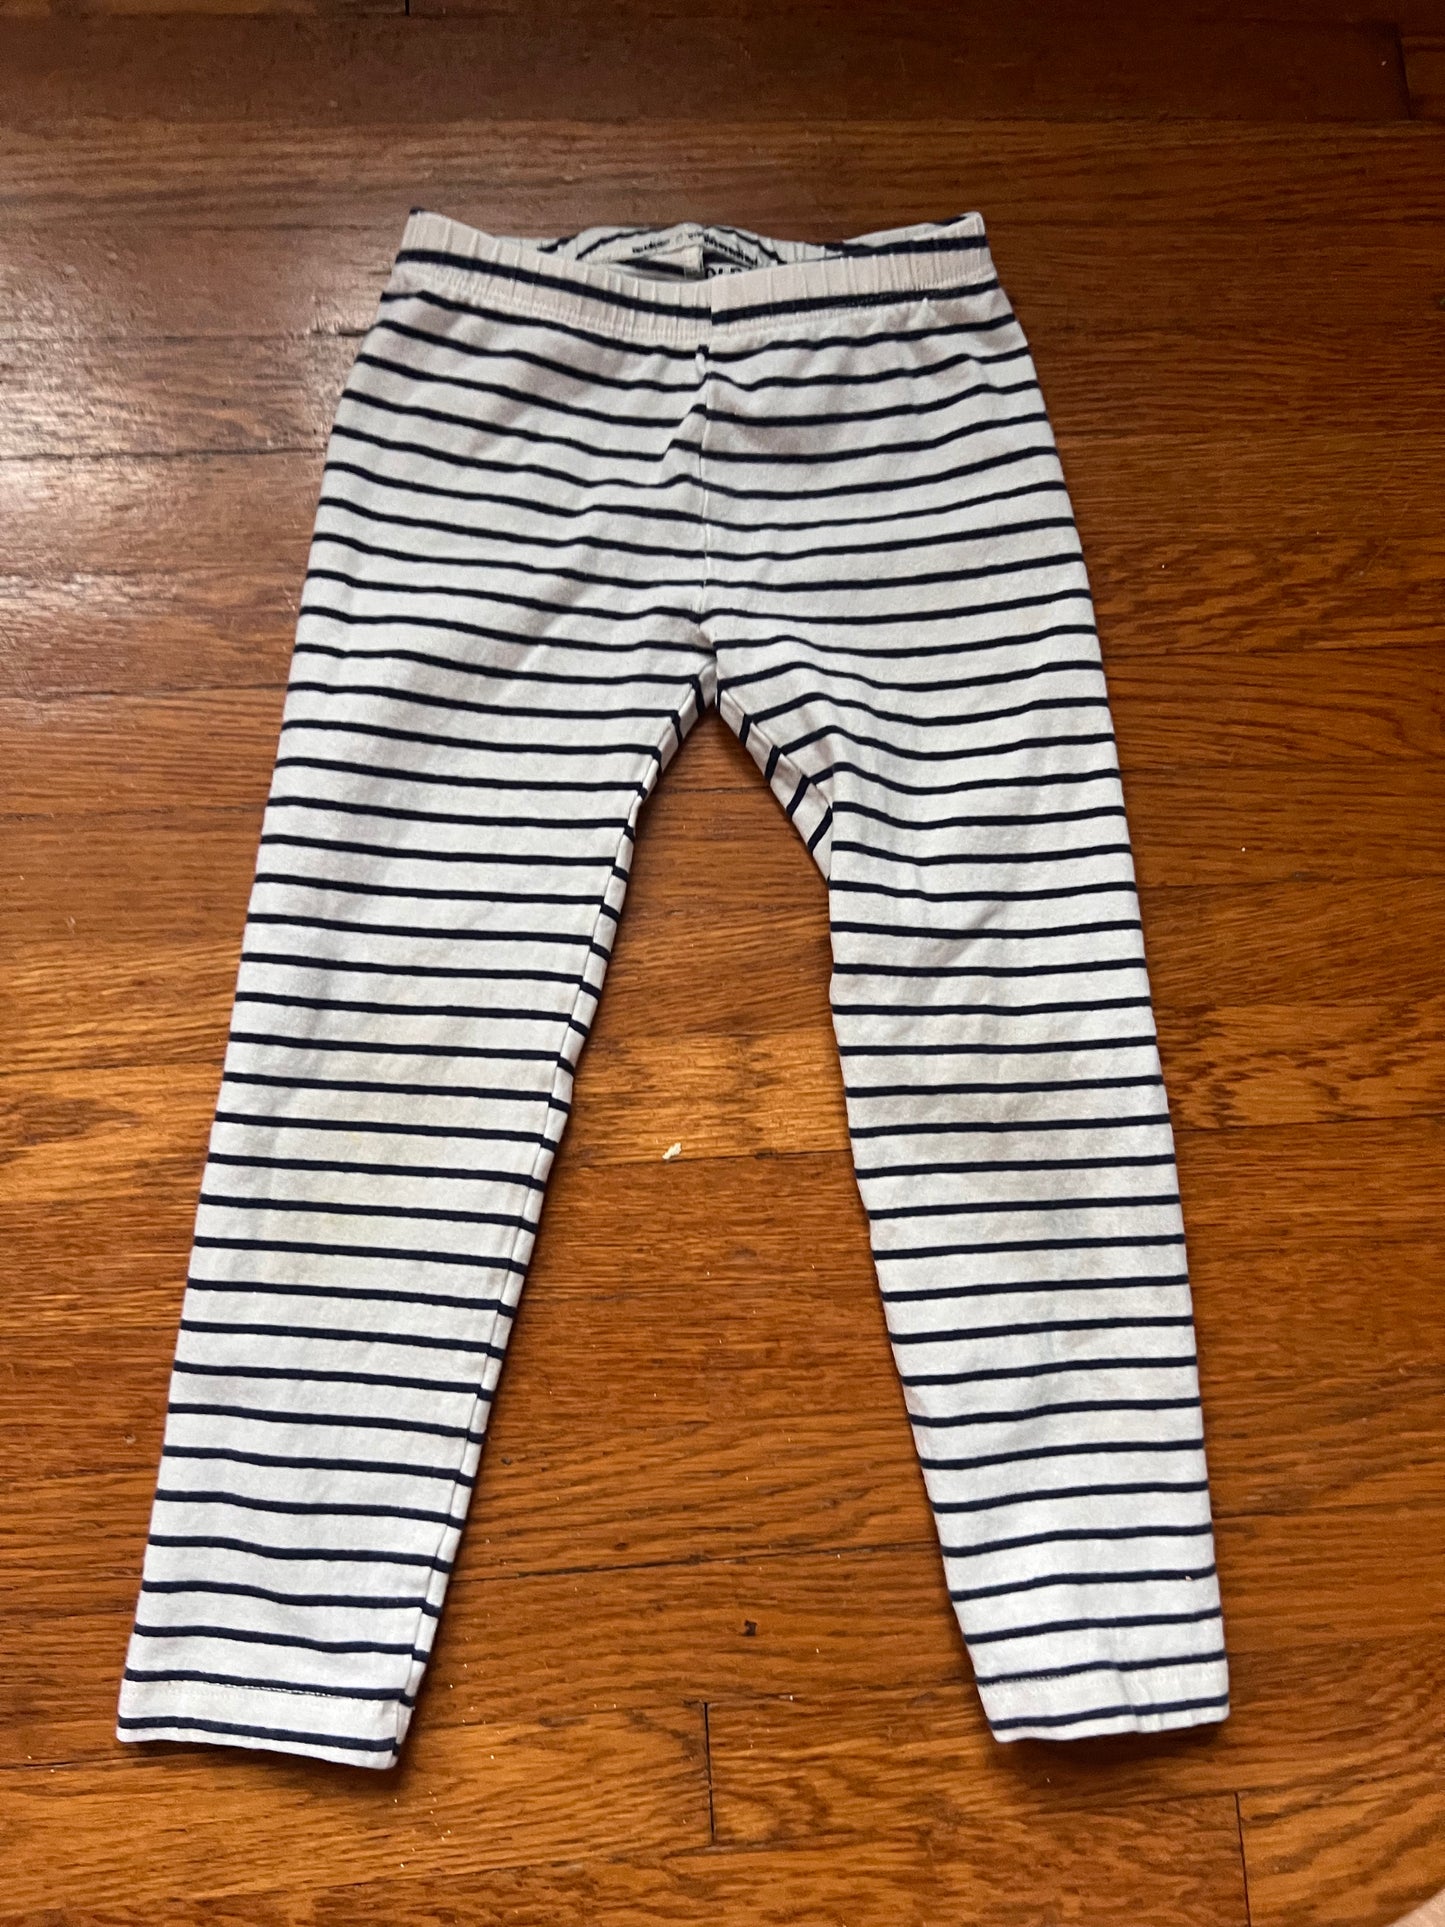 Old Navy 4t striped pants PPU 45212